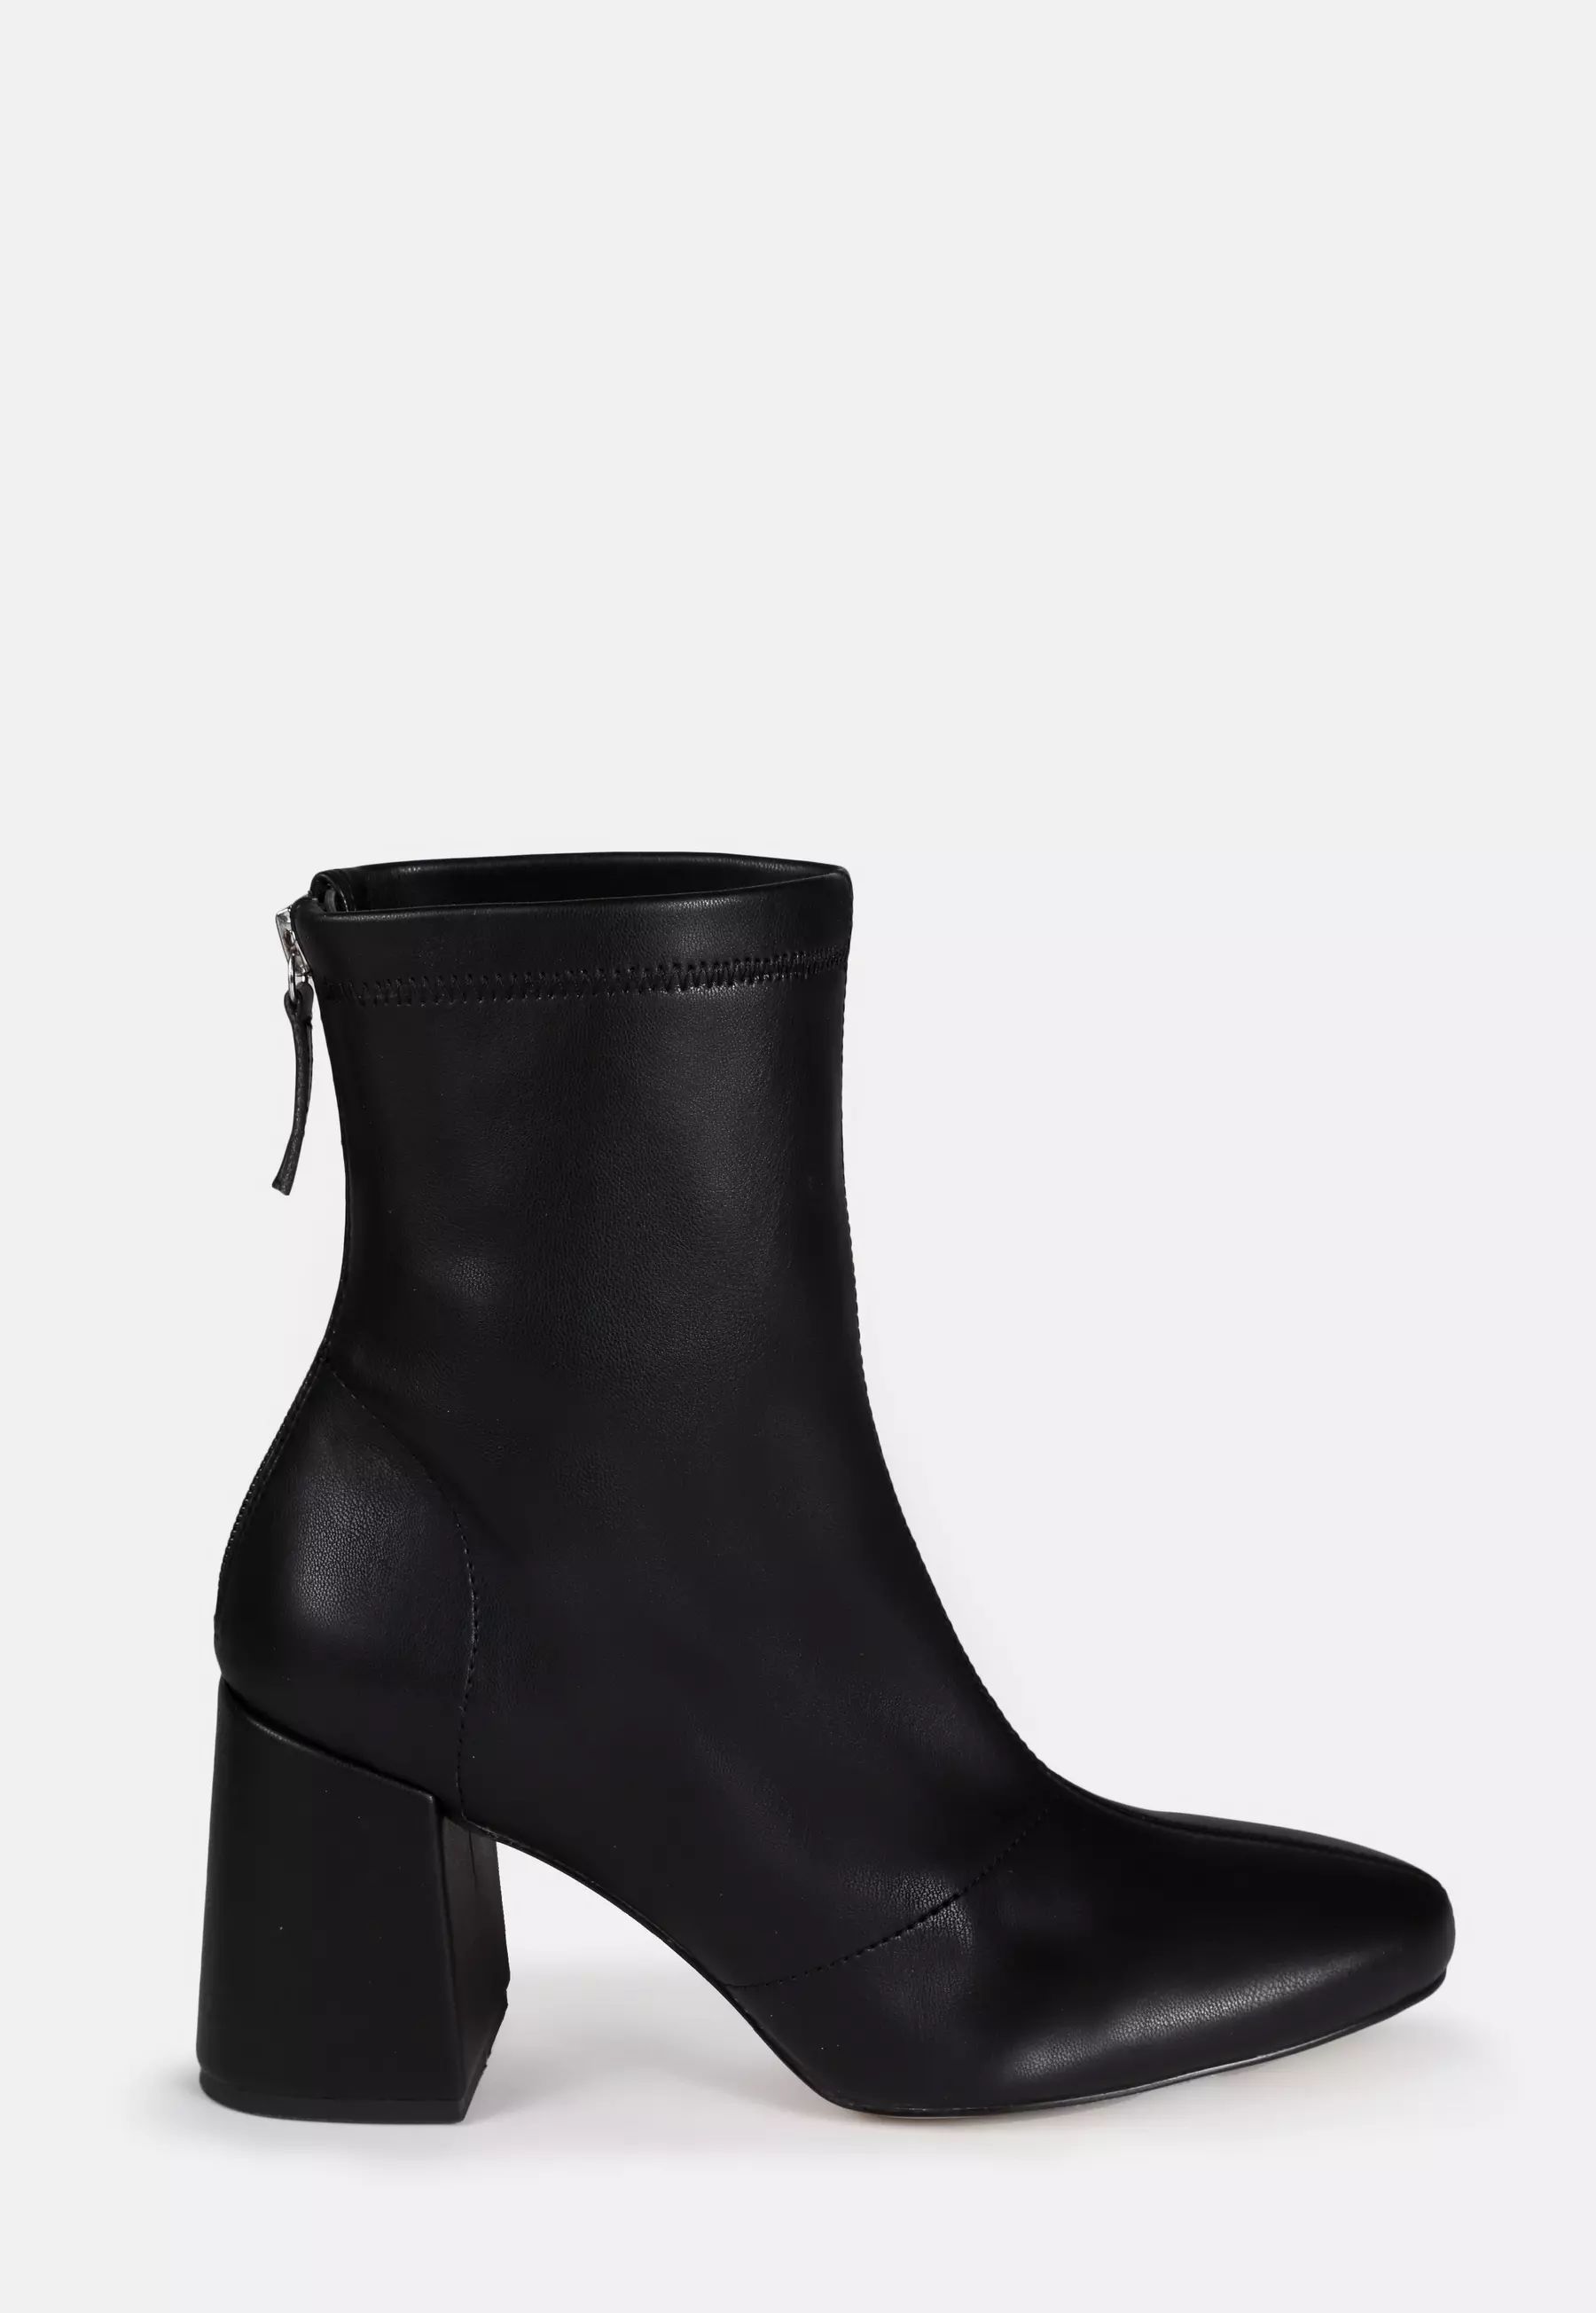 Missguided - Black Faux Leather Block Heel Sock Boots | Missguided (US & CA)